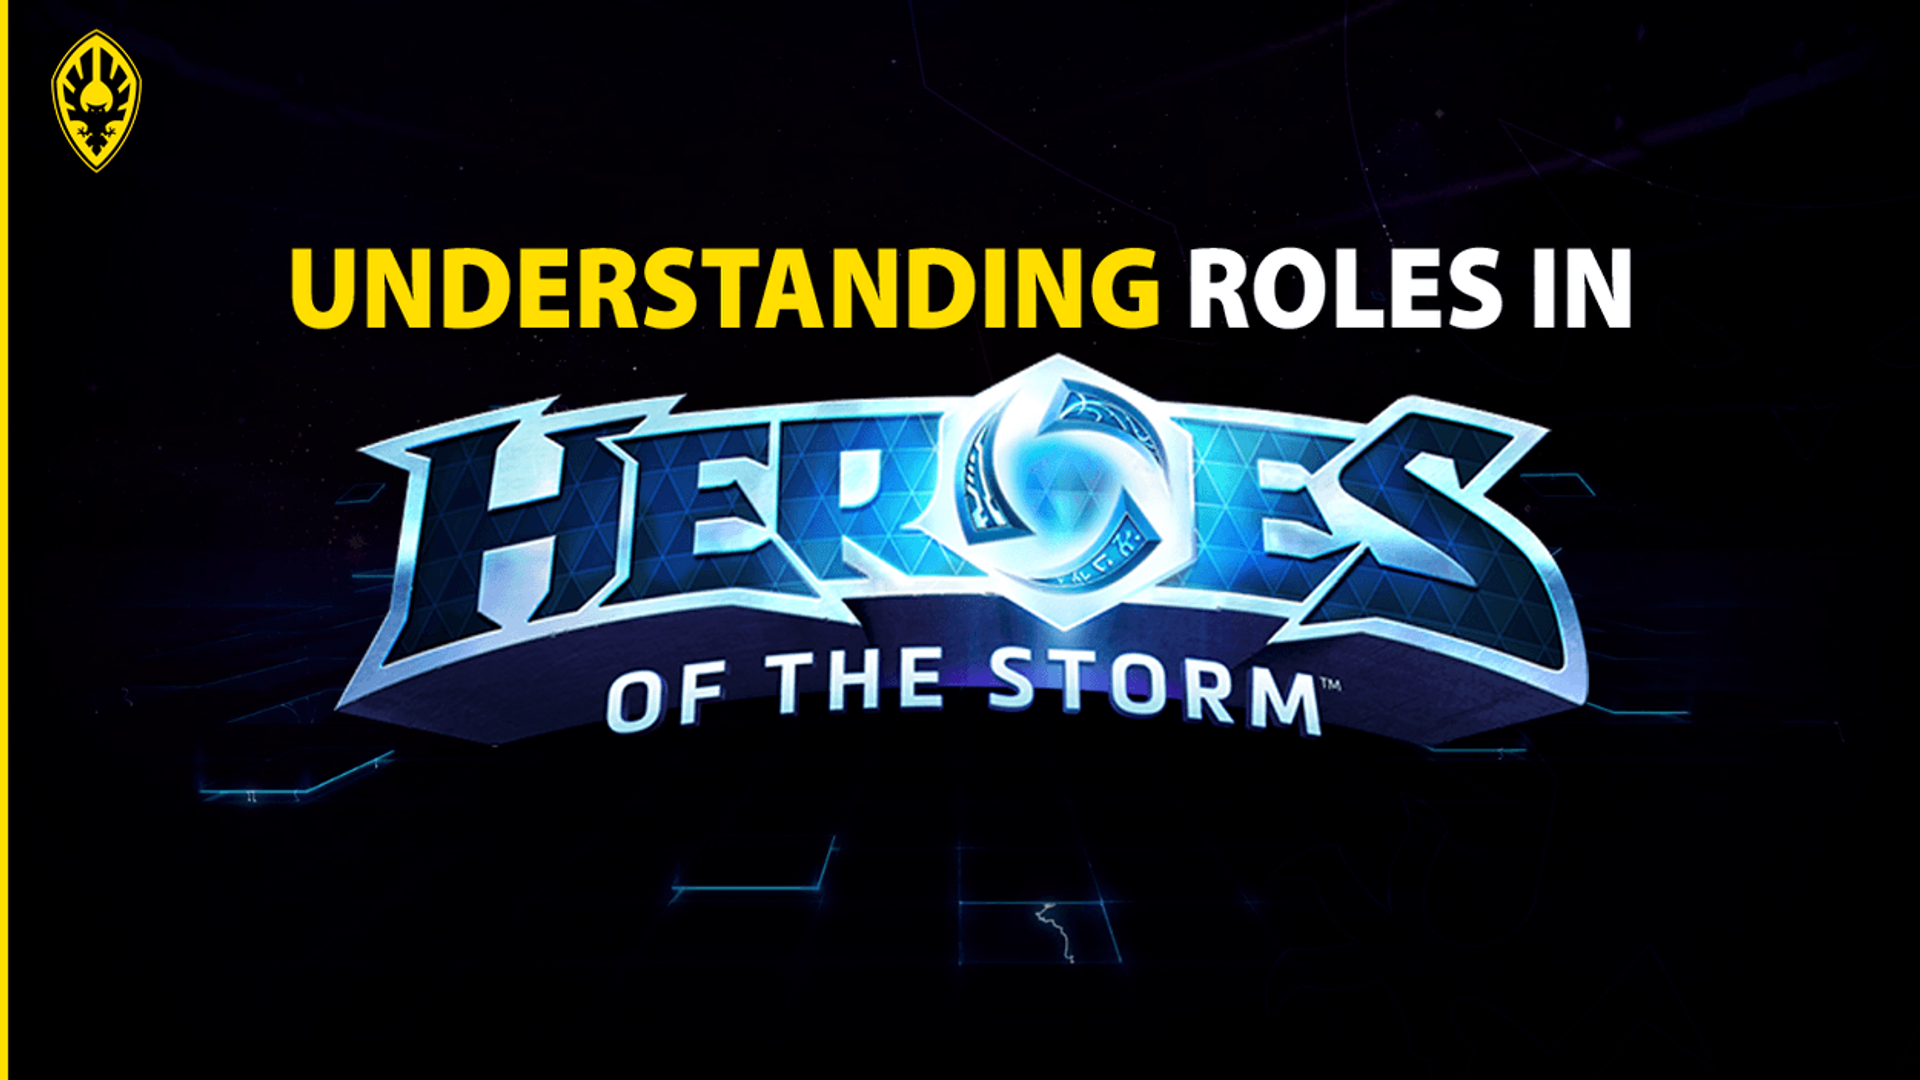 Sonya Build Guides :: Heroes of the Storm (HotS) Sonya Builds on